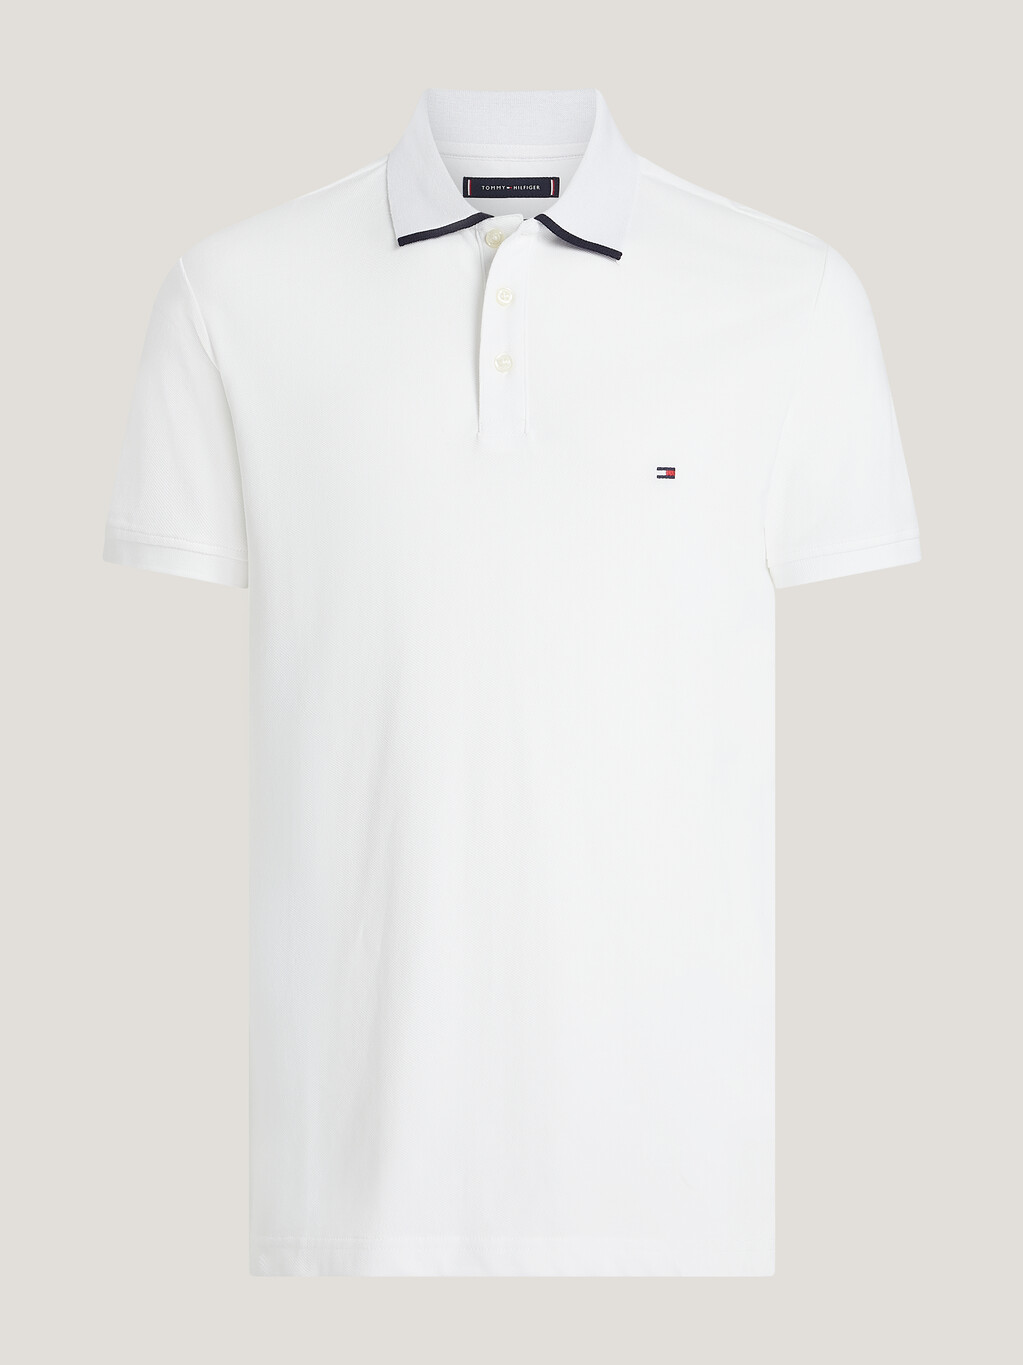 Hilfiger Monotype Tipped Regular Fit Polo, White, hi-res